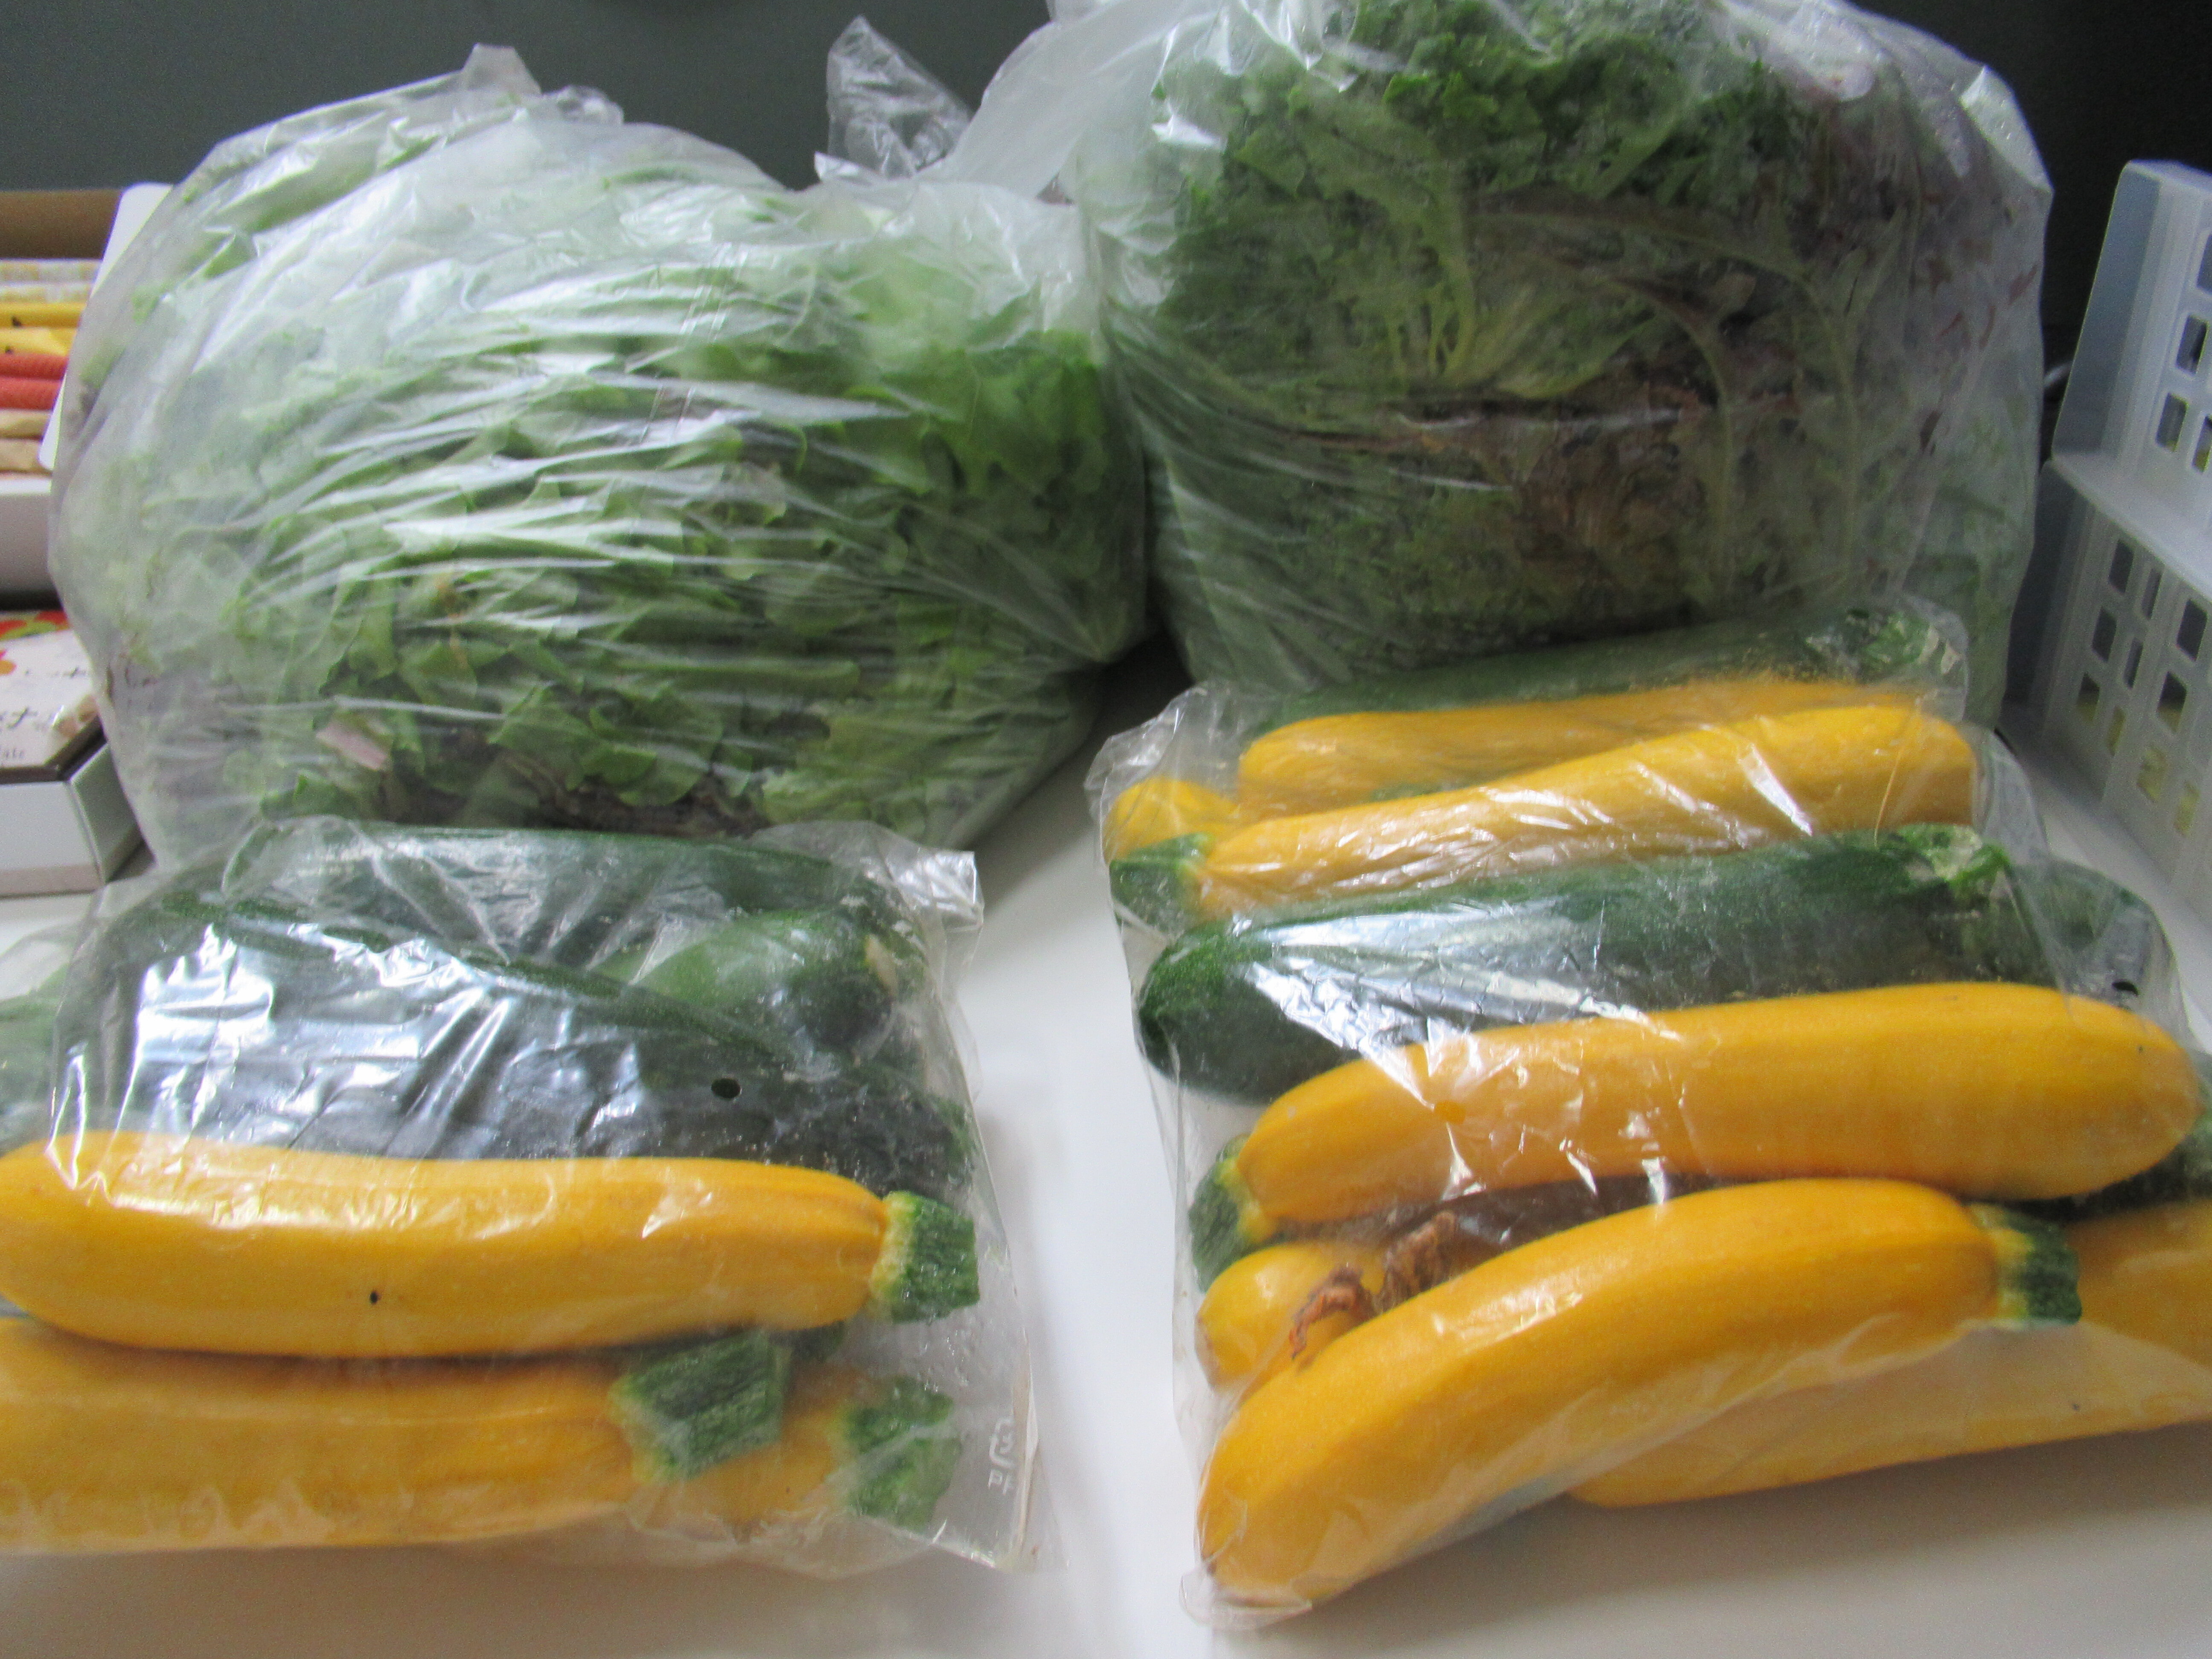 MS. Takahashi donated vegetables(Leaf Lettuce & Zucchini) to the international students